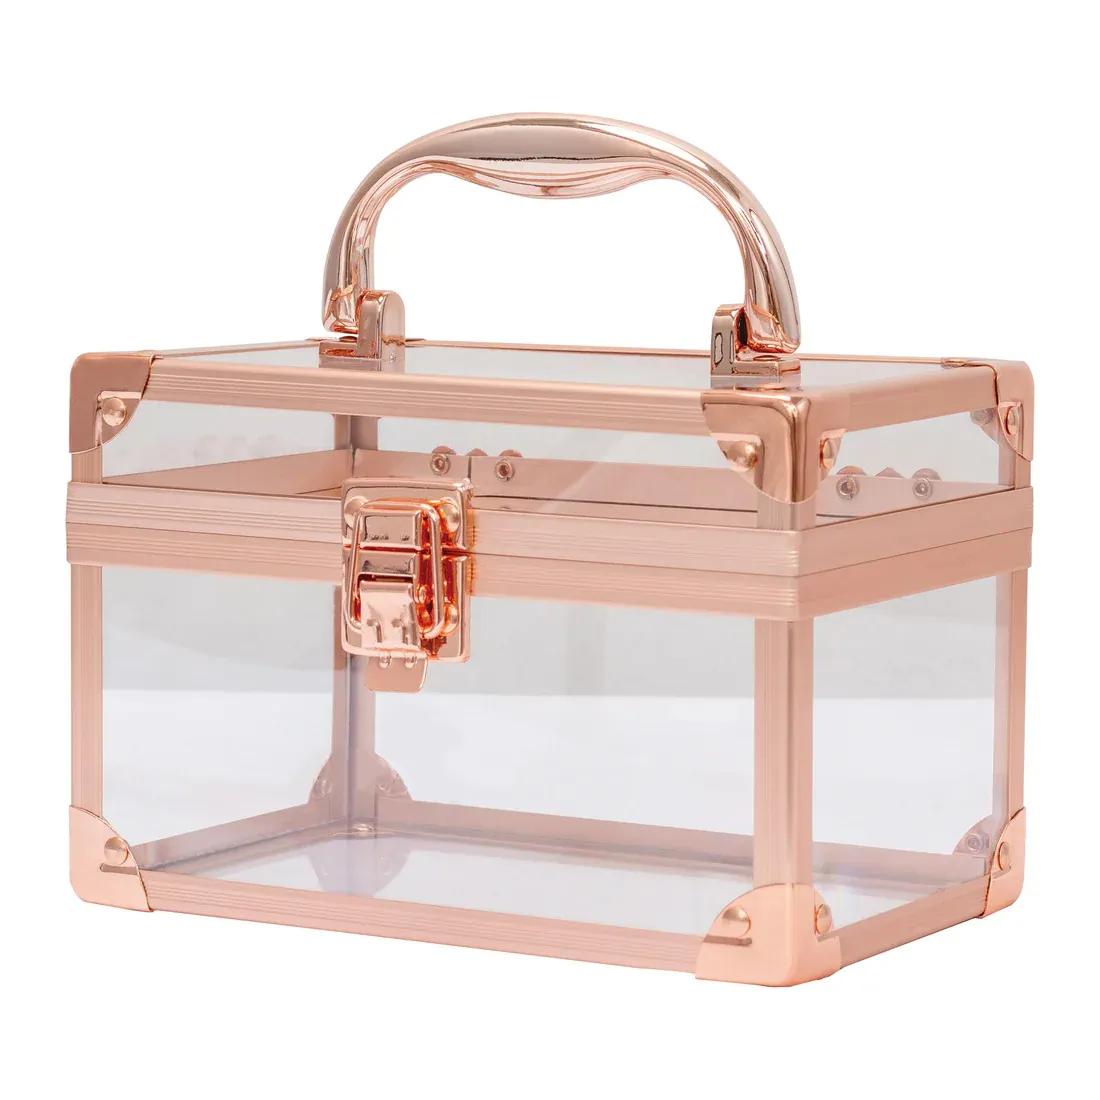 Bespoke Acrylic Carrying Box with Top Handle & Latch Makeup Skincare Products Toiletry Aluminum Frame Display Storage Box